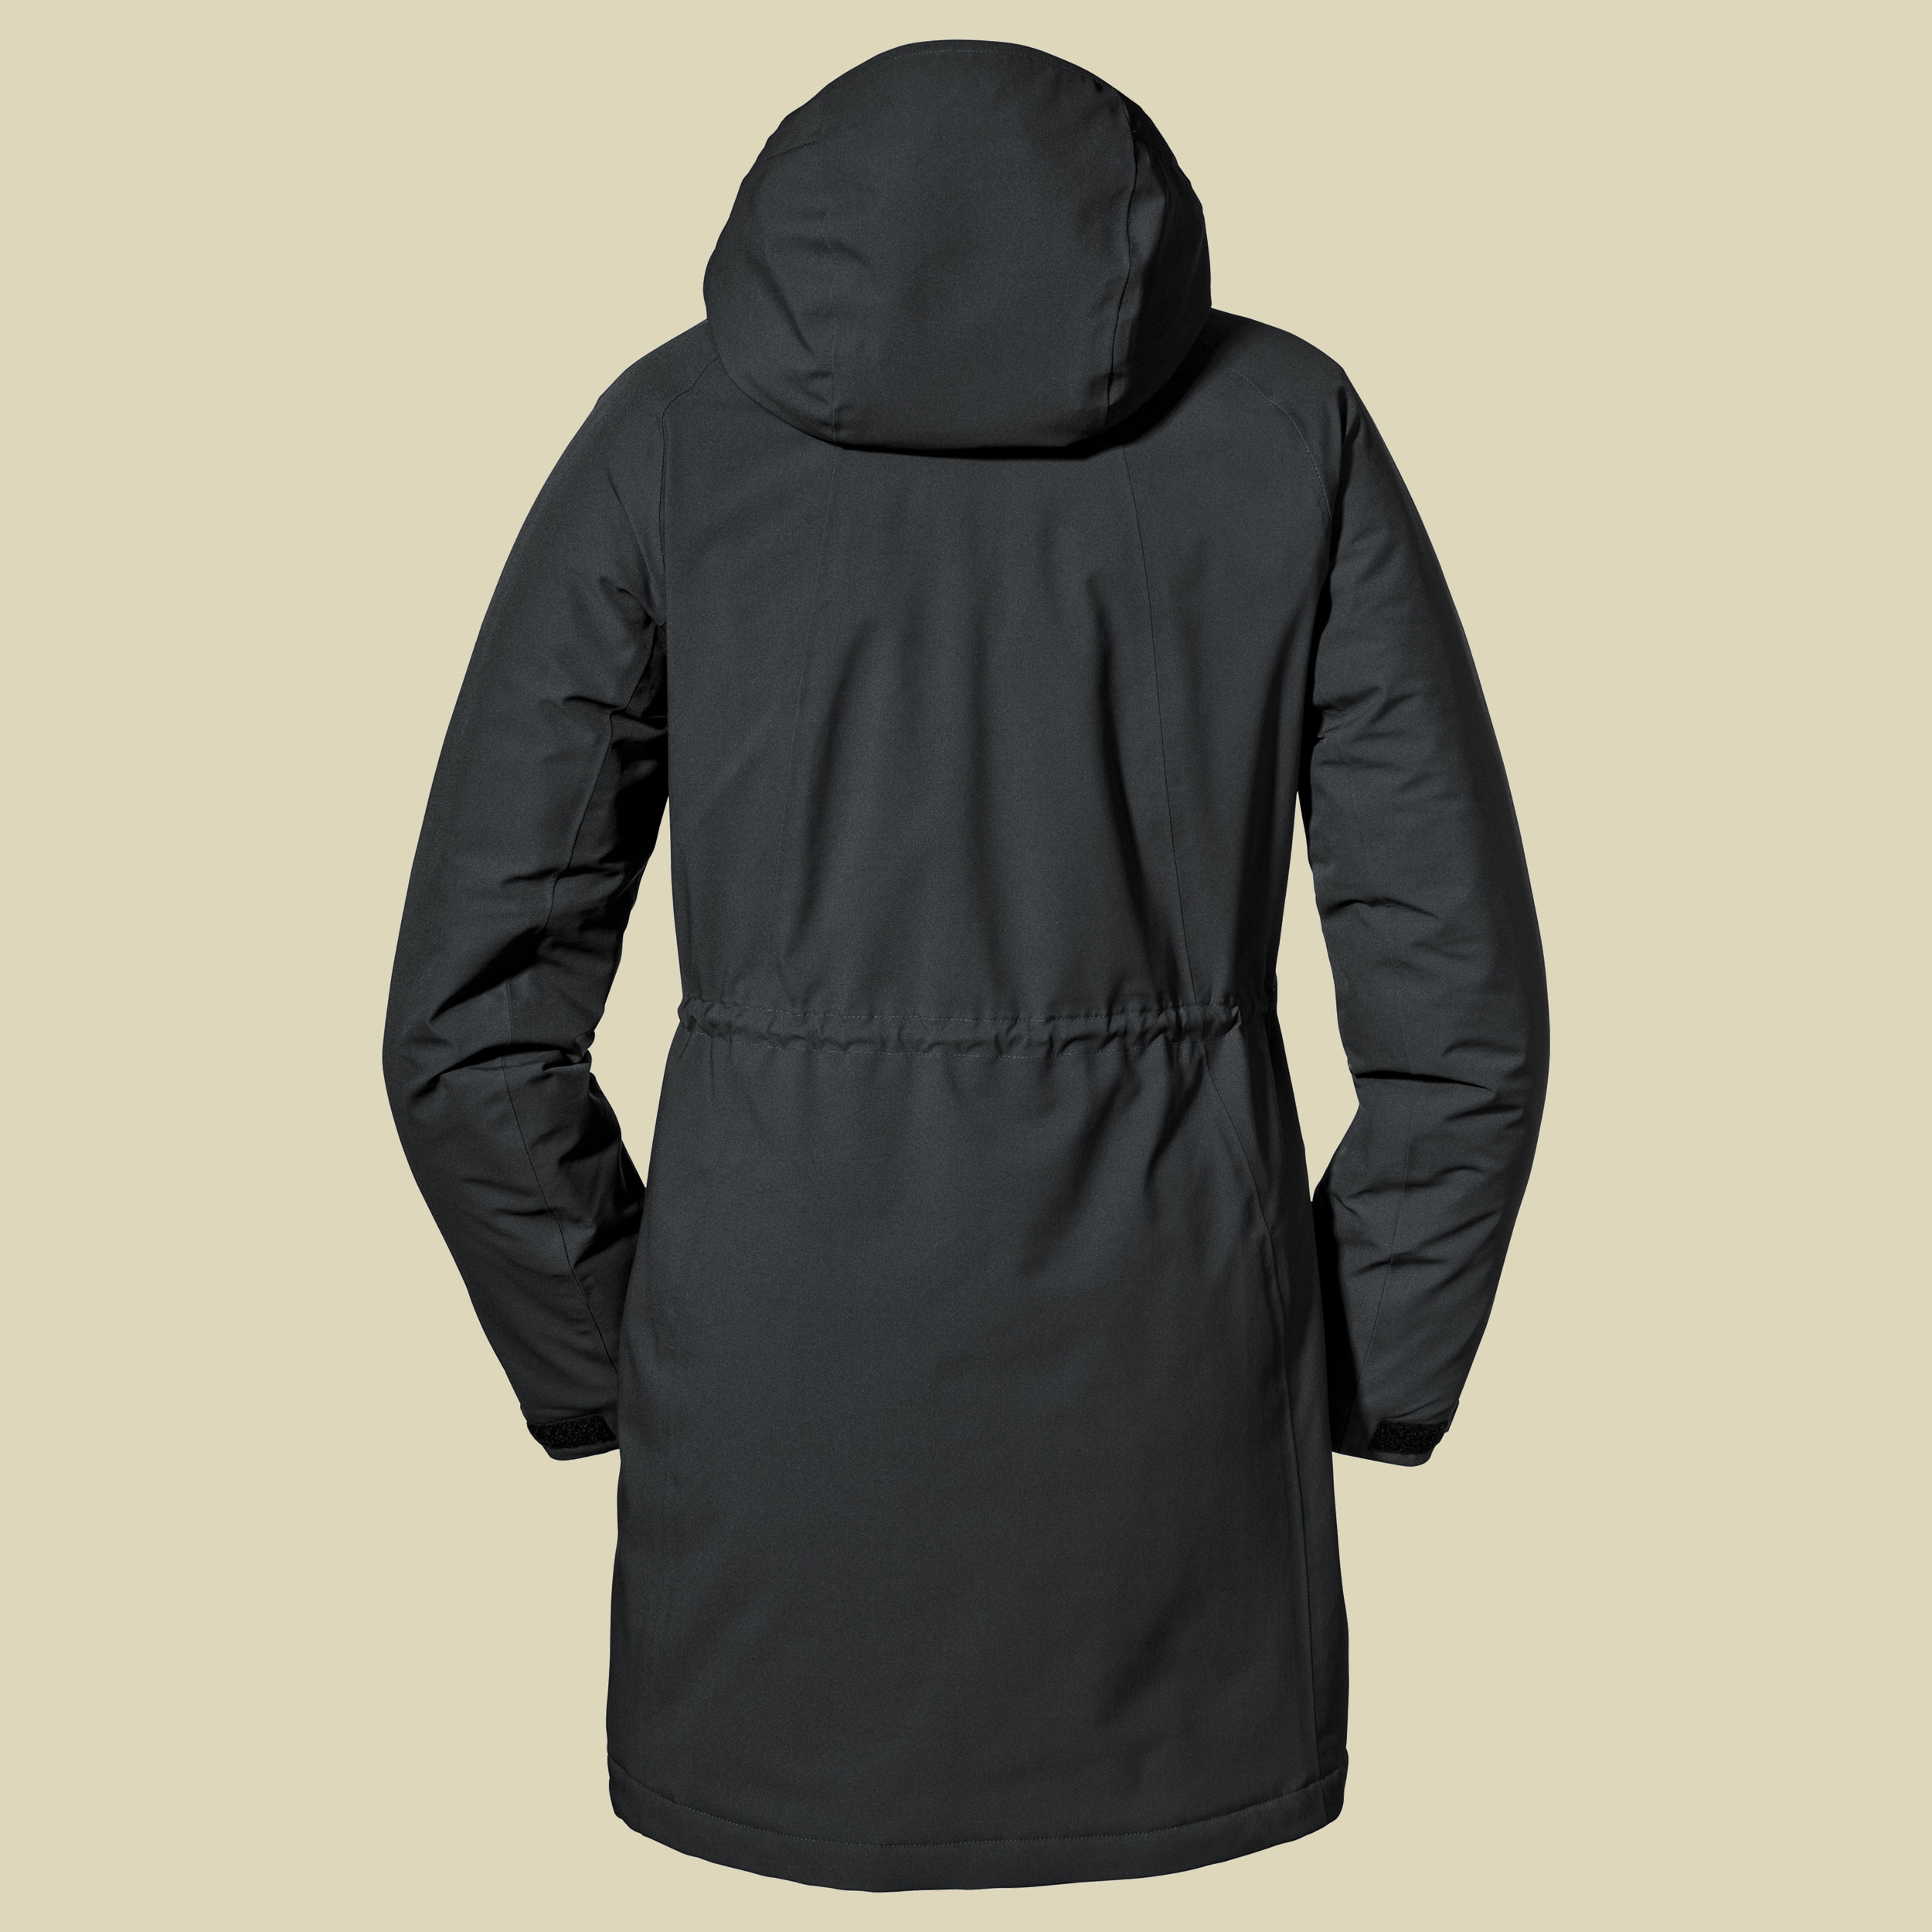 Insulated Jacket Bastianisee L Women Größe 52 Farbe black